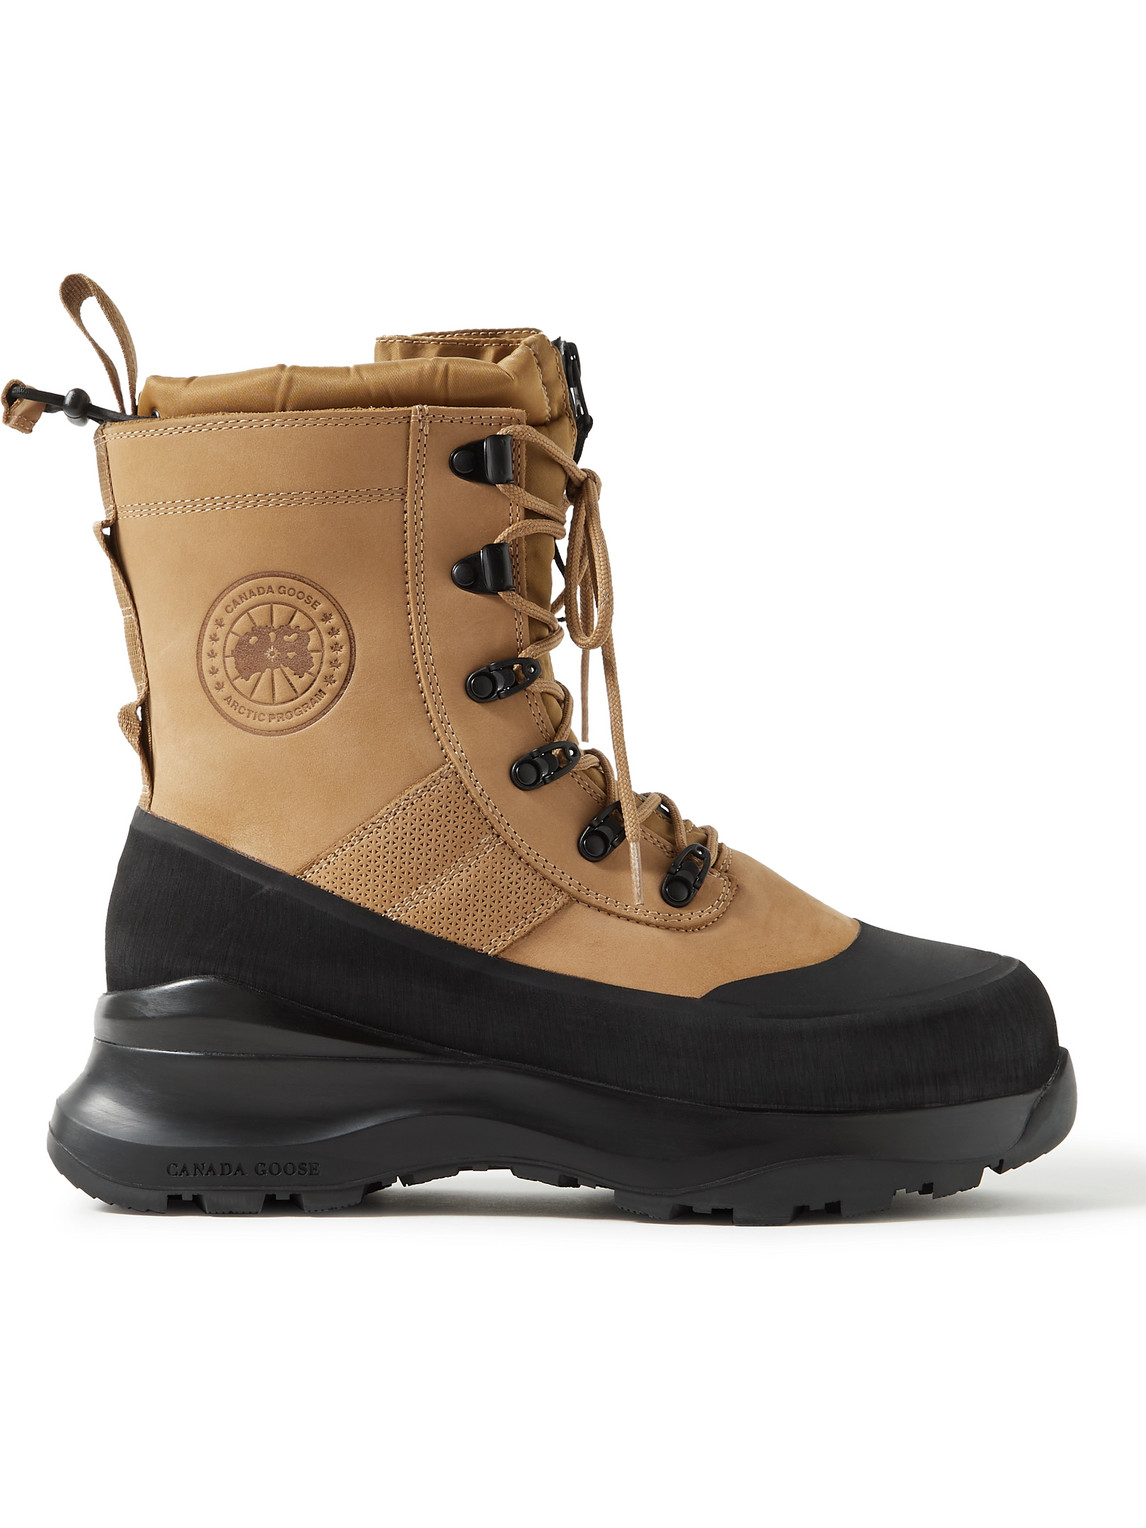 Armstrong Rubber-Trimmed Nubuck Boots